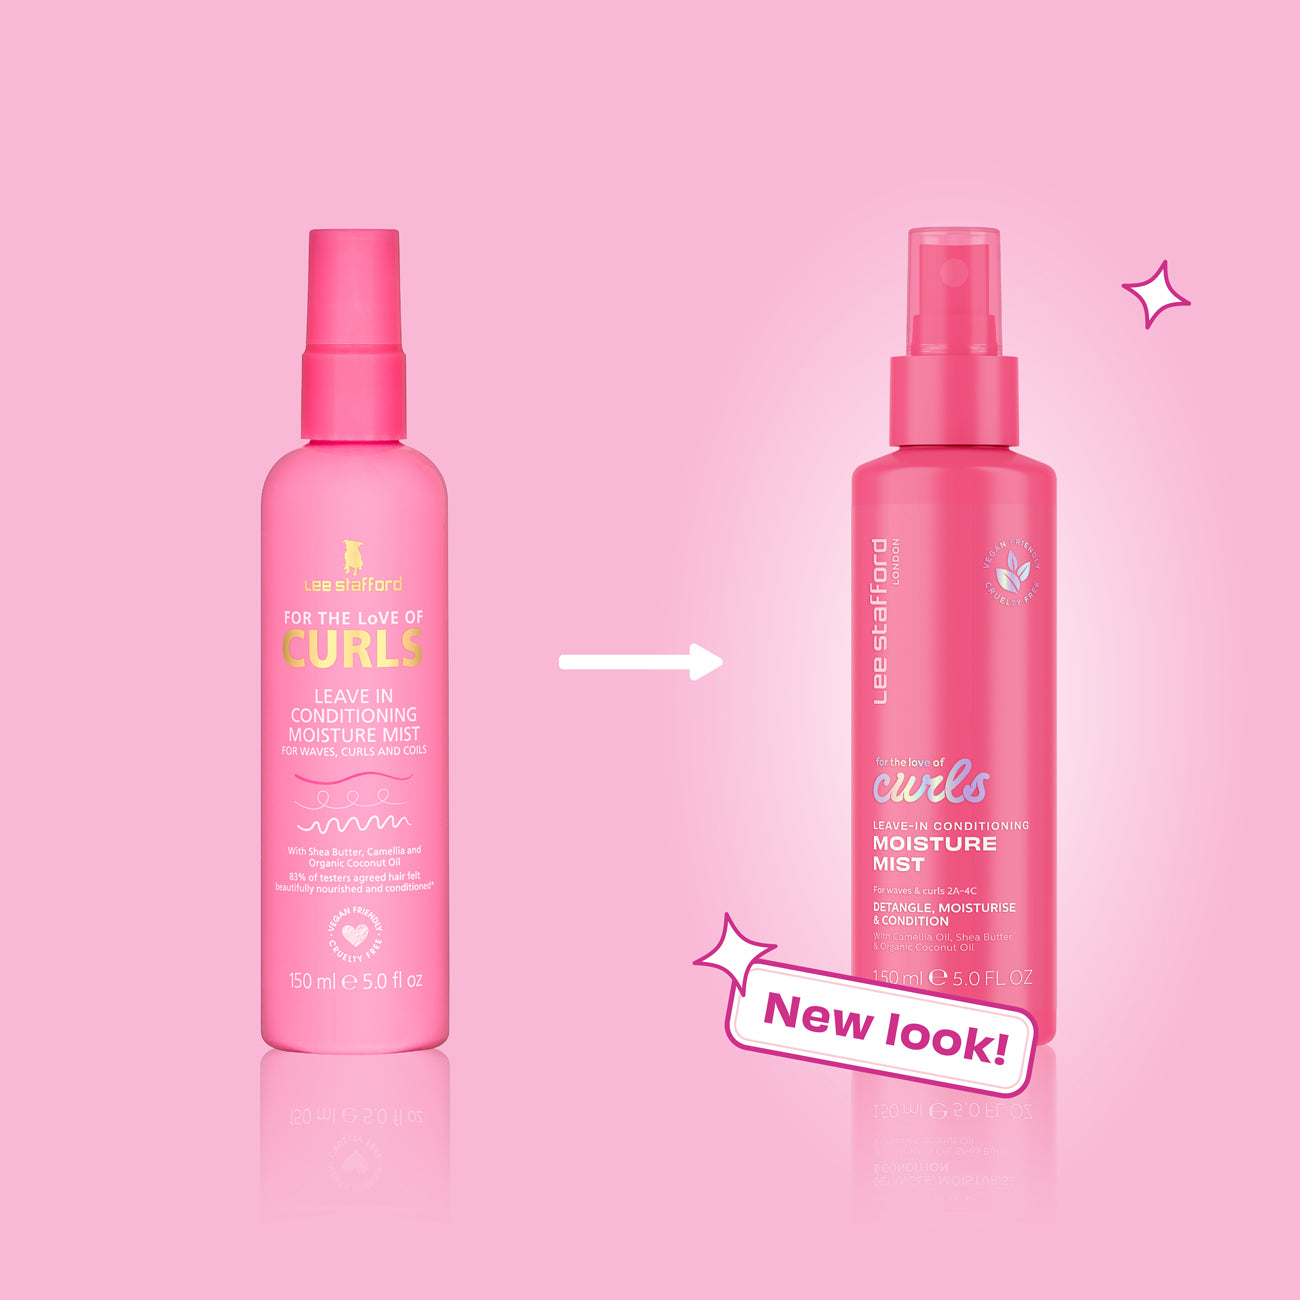 For The Love of Curls : Leave in Conditioning Moisture Mist